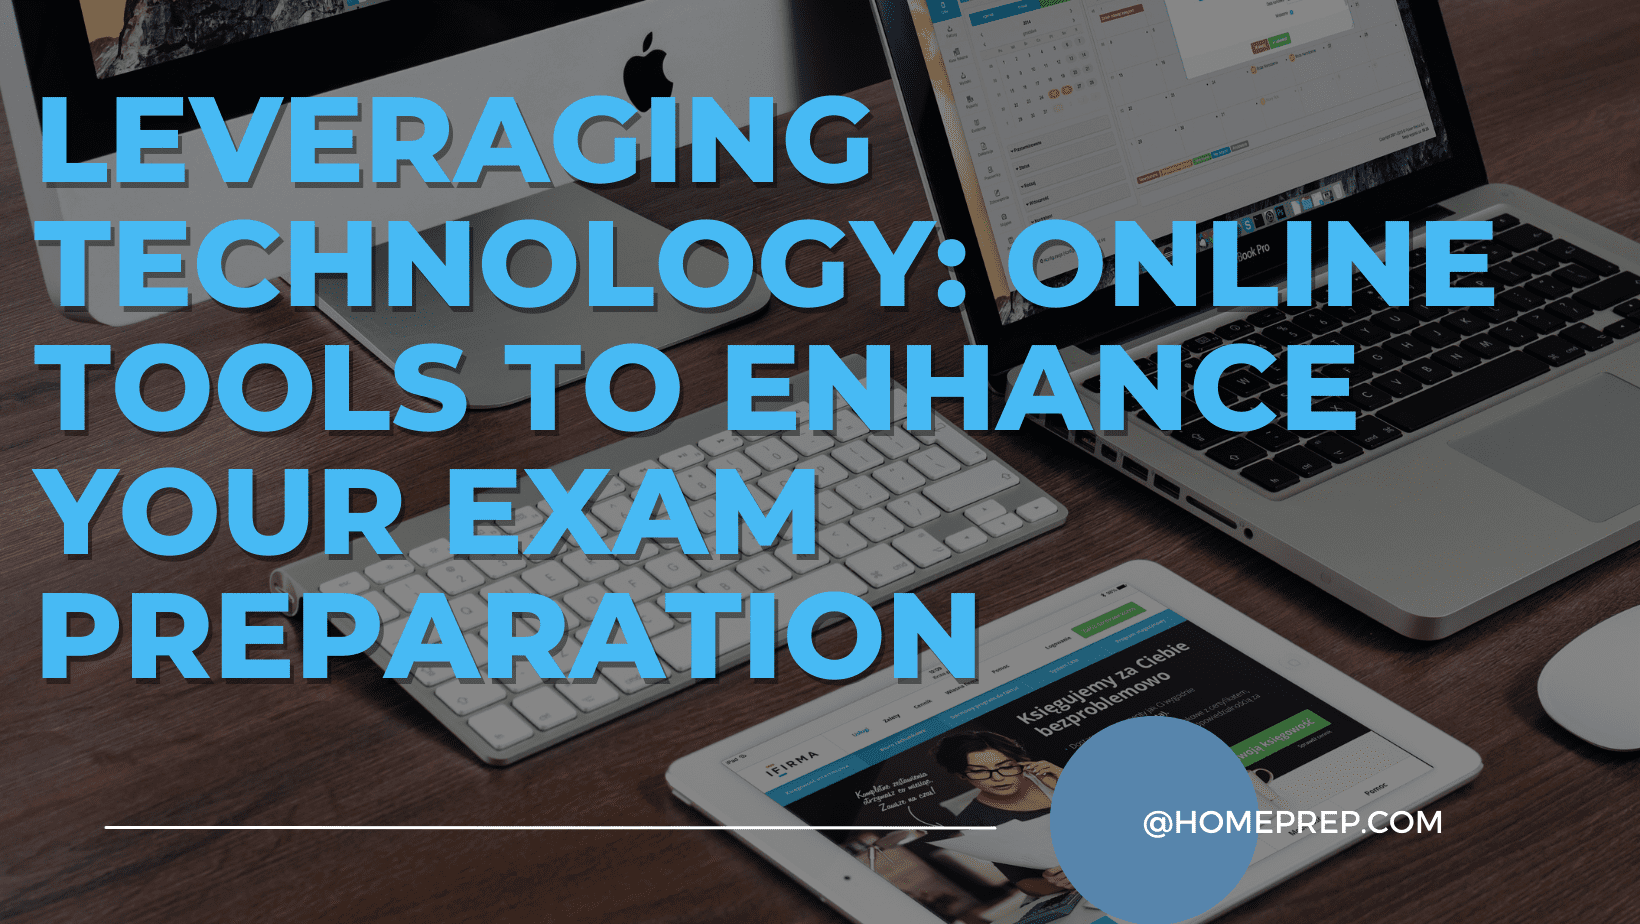 Leveraging Technology: Online Tools to Enhance Your Exam Preparation